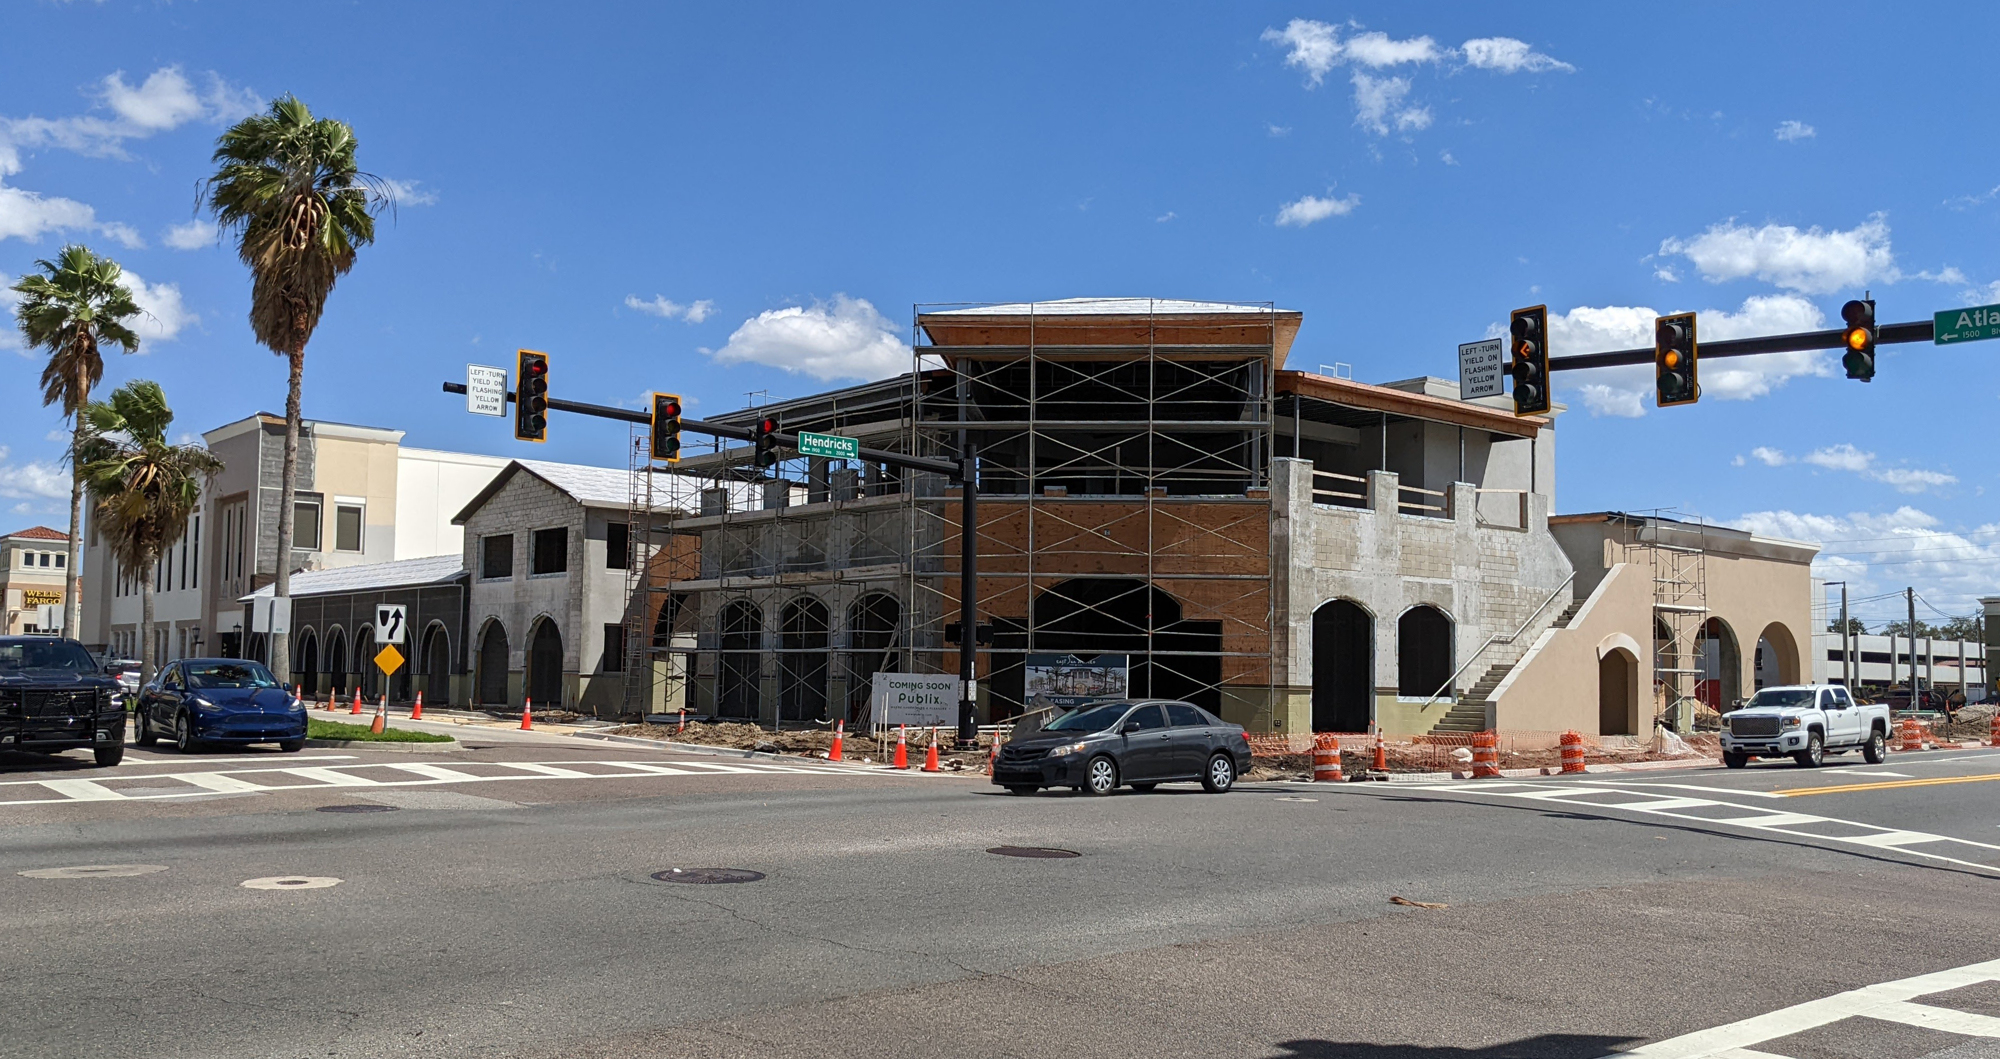 Gemma Fish + Oyster will anchor this corner of East San Marco at Hendricks Avenue and Atlantic Boulevard. The two-story restaurant will have  6,500 square feet of space with seating available at street level.